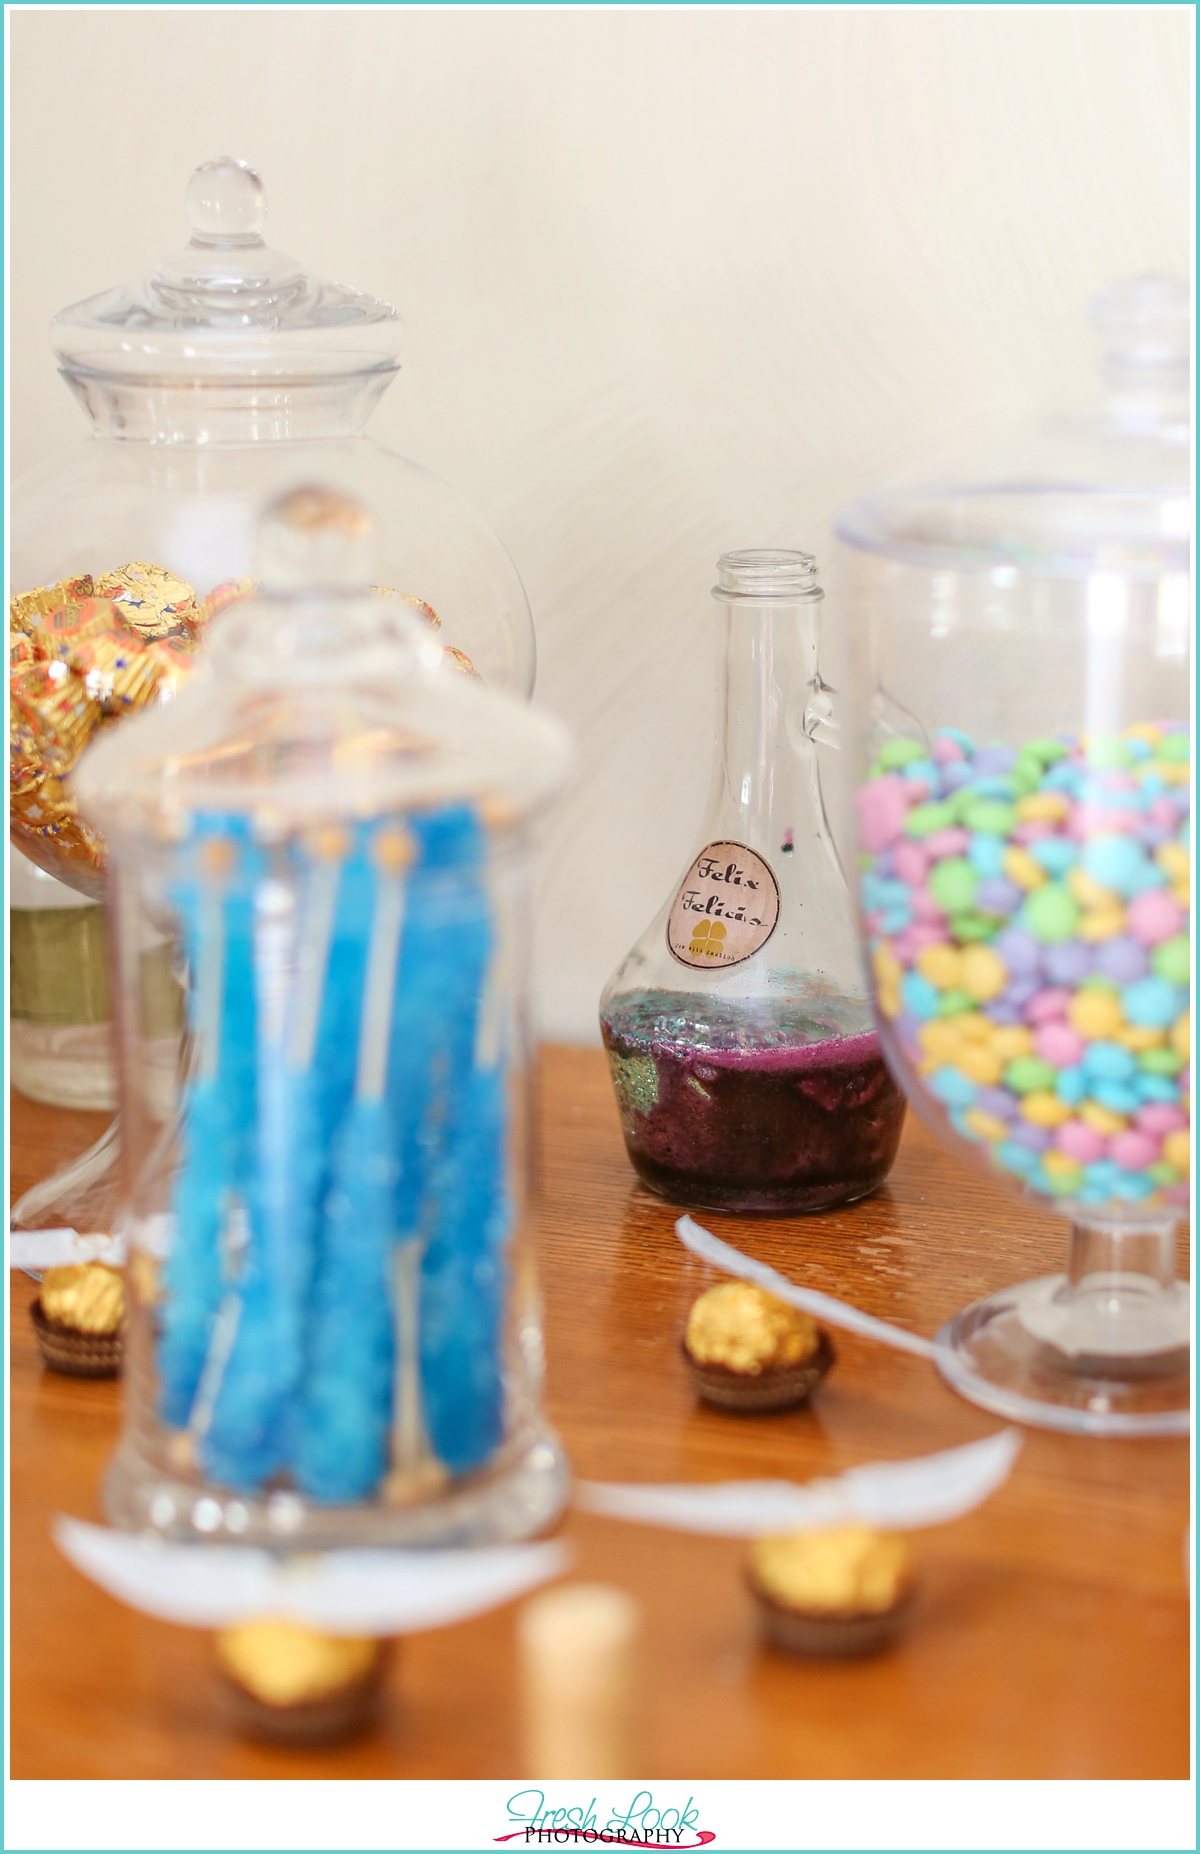 Ministry of Magic Potion Candy bar